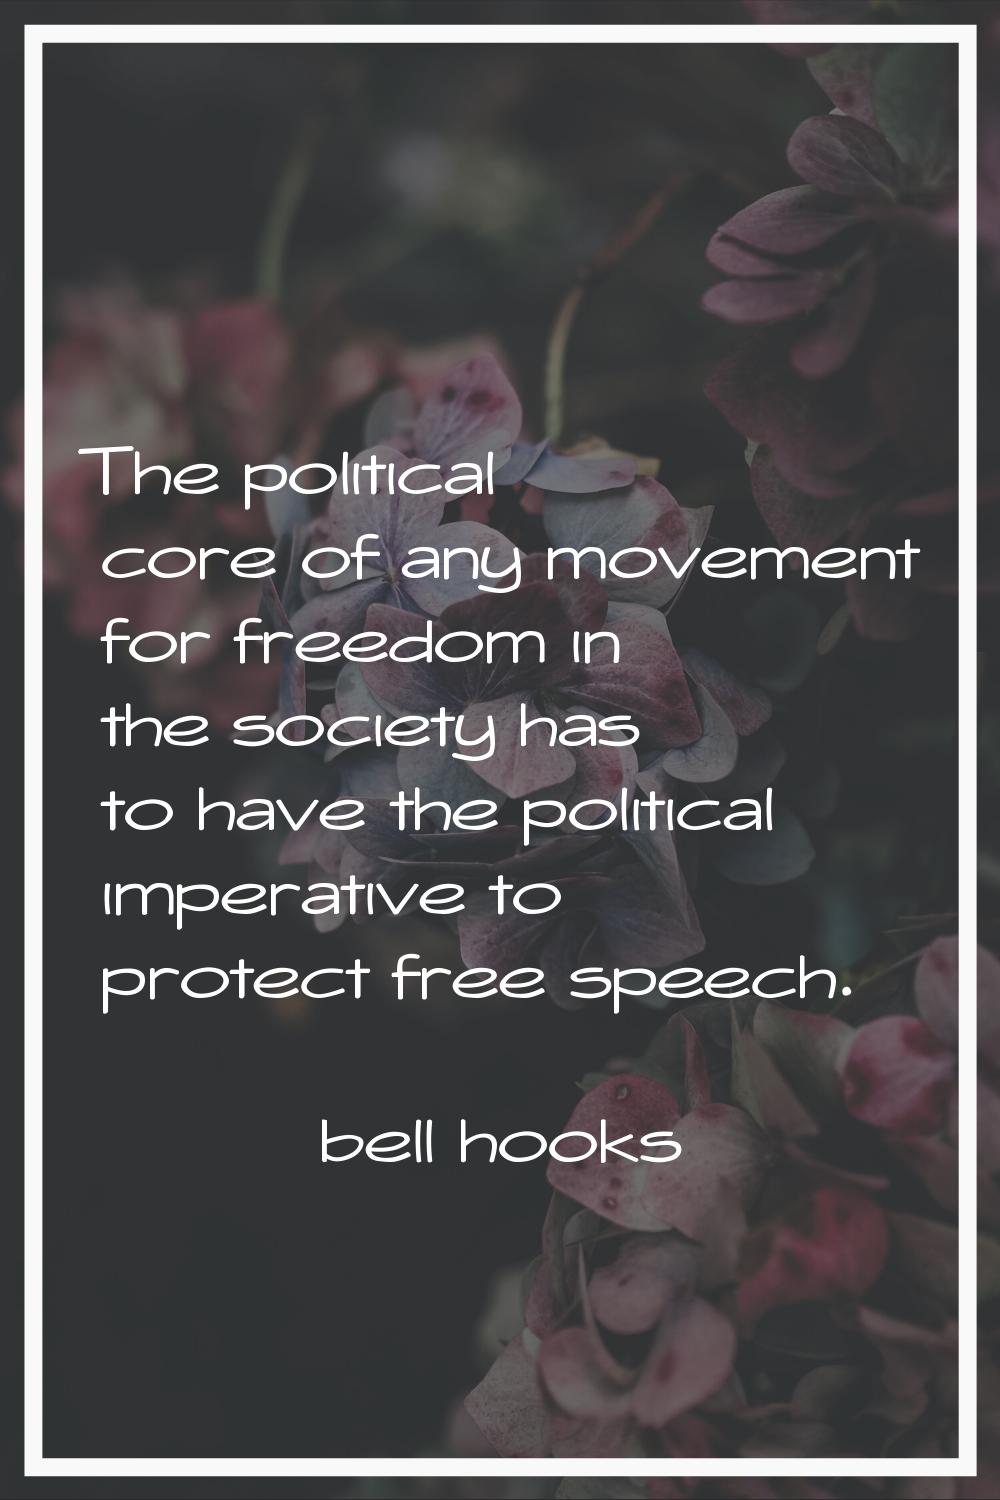 The political core of any movement for freedom in the society has to have the political imperative 